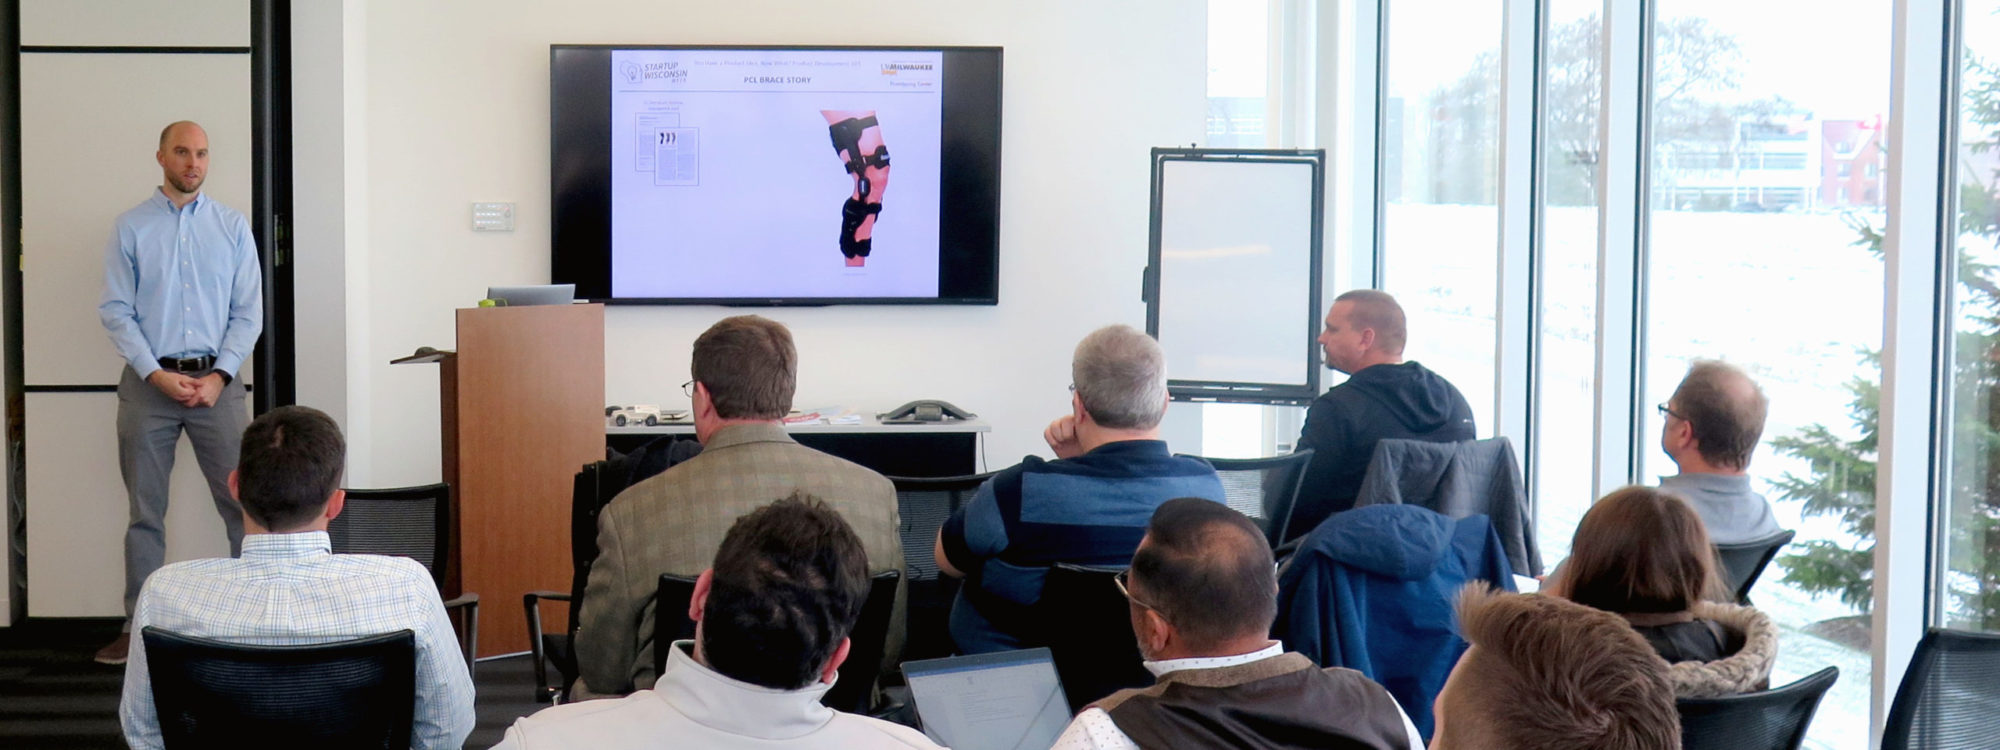 Image of Kyle Jansson giving a seminar on Product Development at the UWM Innovation Accelerator Building